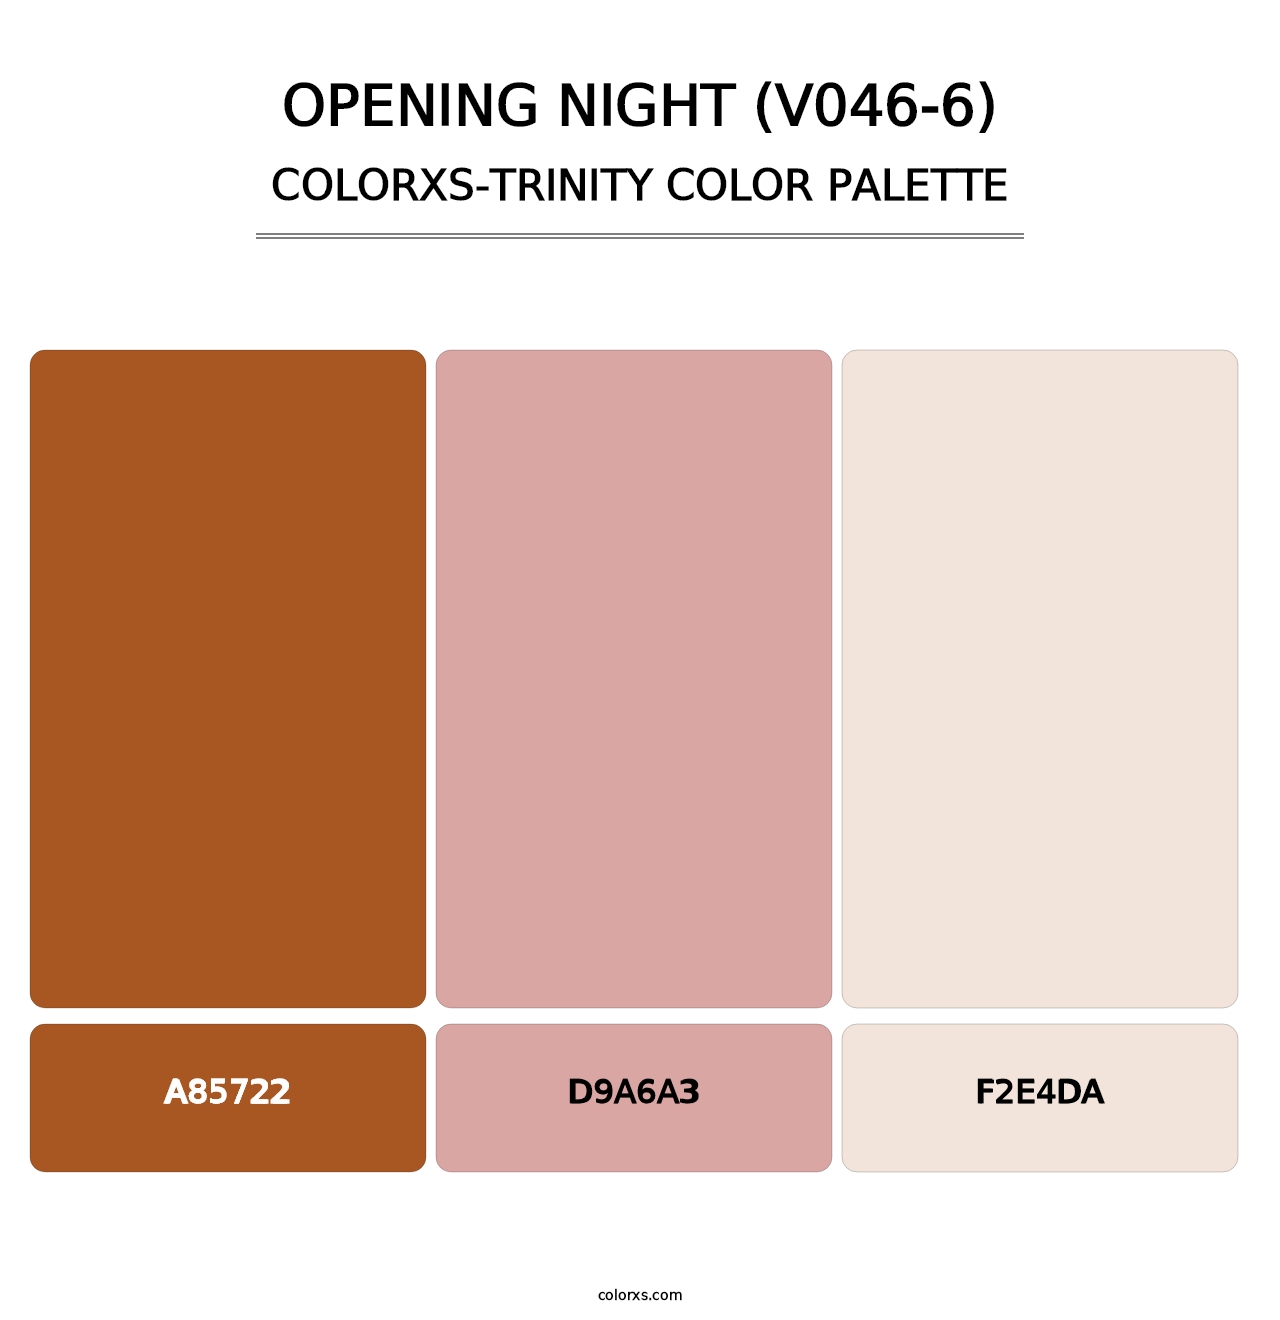 Opening Night (V046-6) - Colorxs Trinity Palette